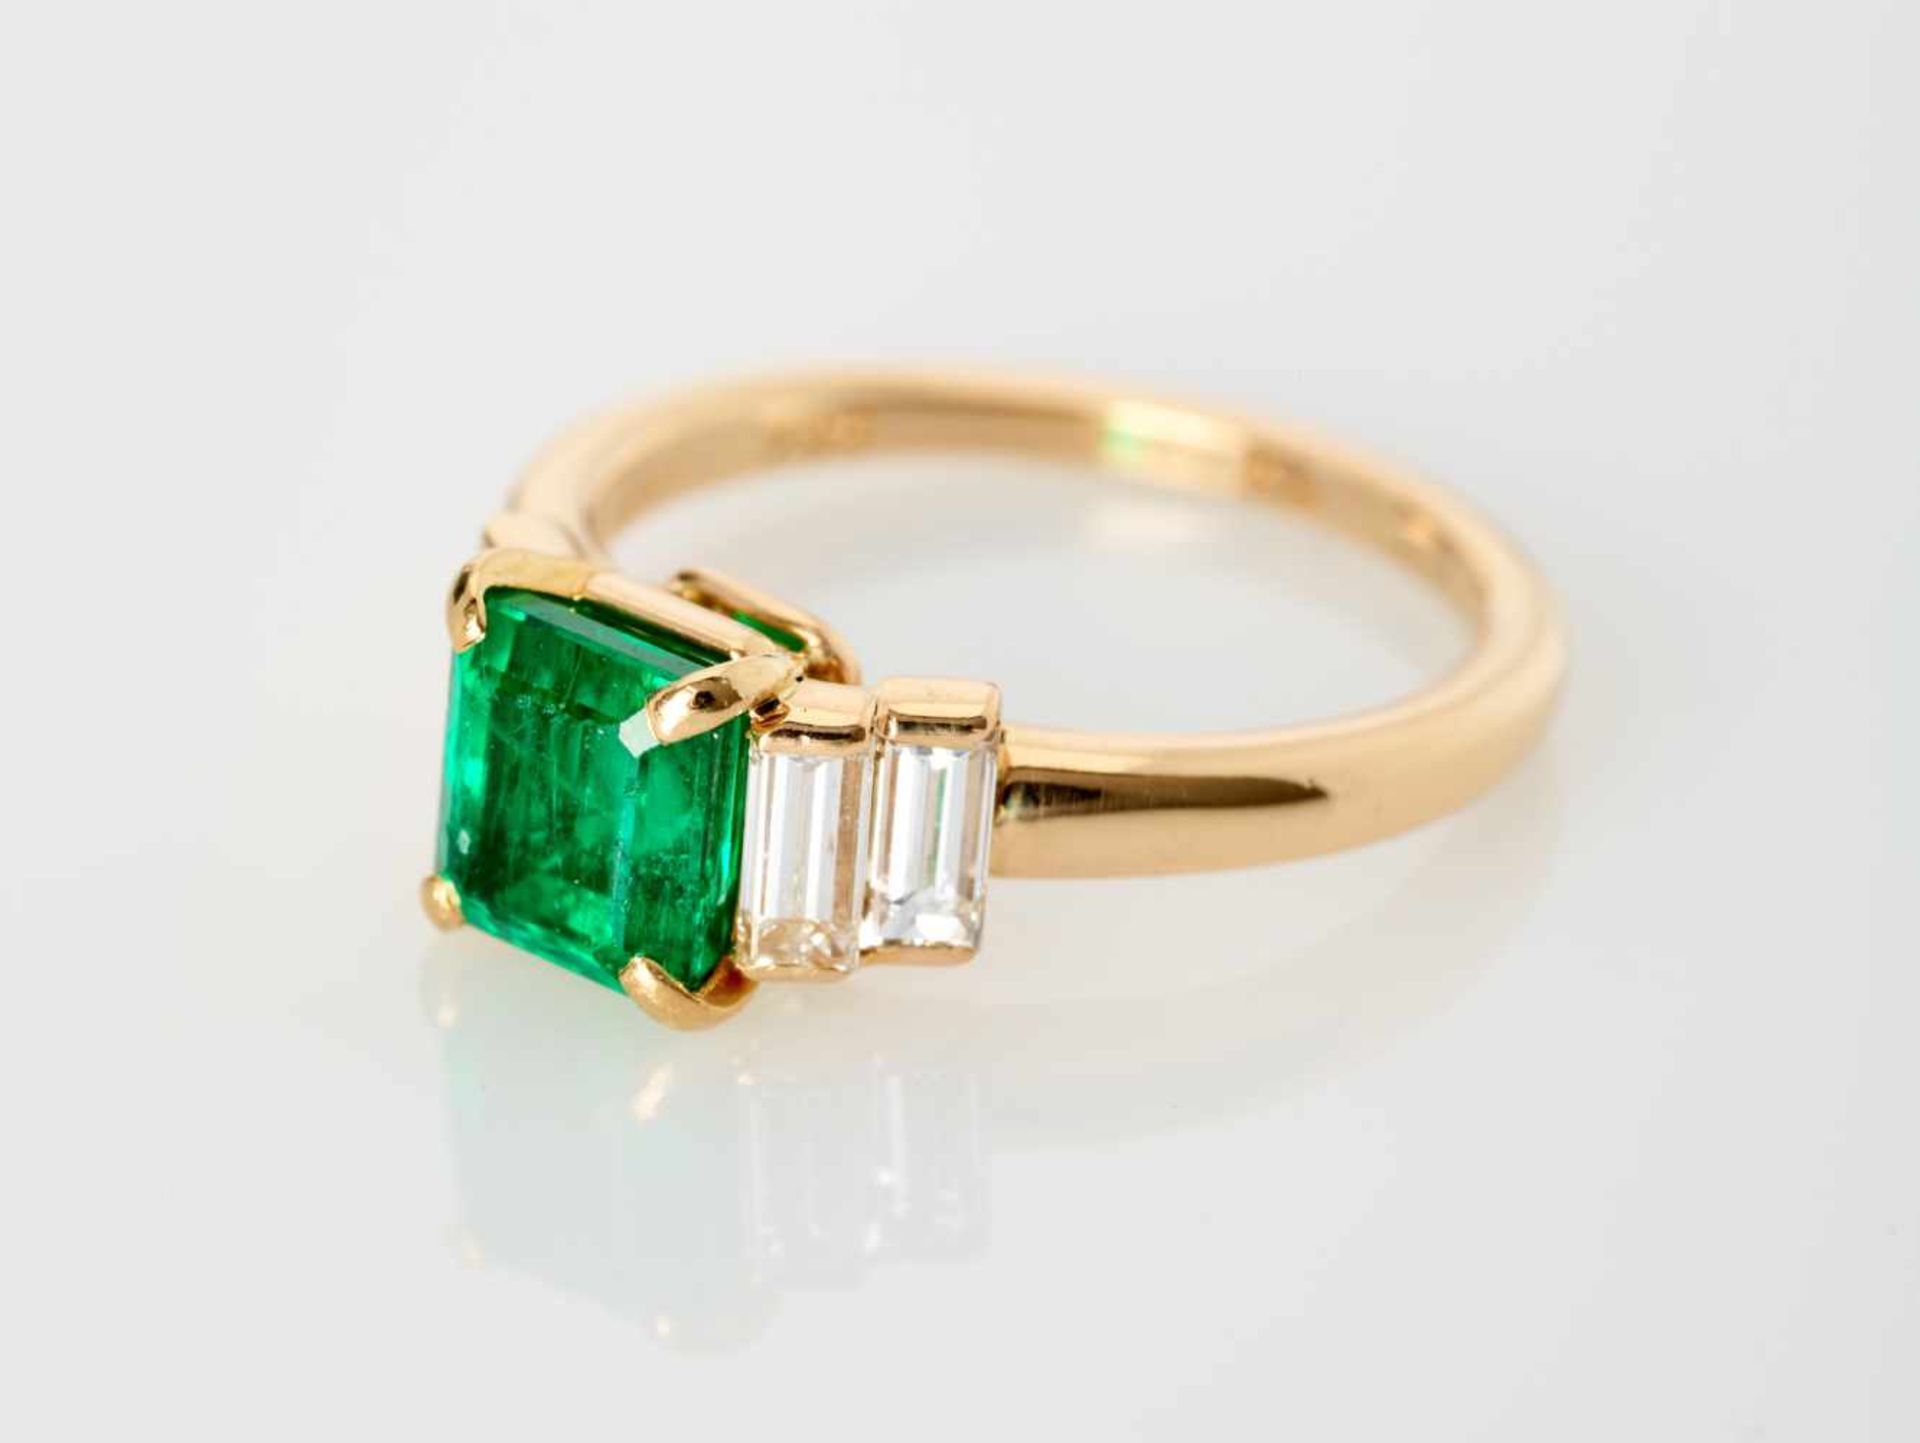 AN IMPORTANT CARTIER EMERALD AND DIAMOND RING Franceca. 1990, signed ‘Cartier’, assay ‘750’, numbers - Image 8 of 9